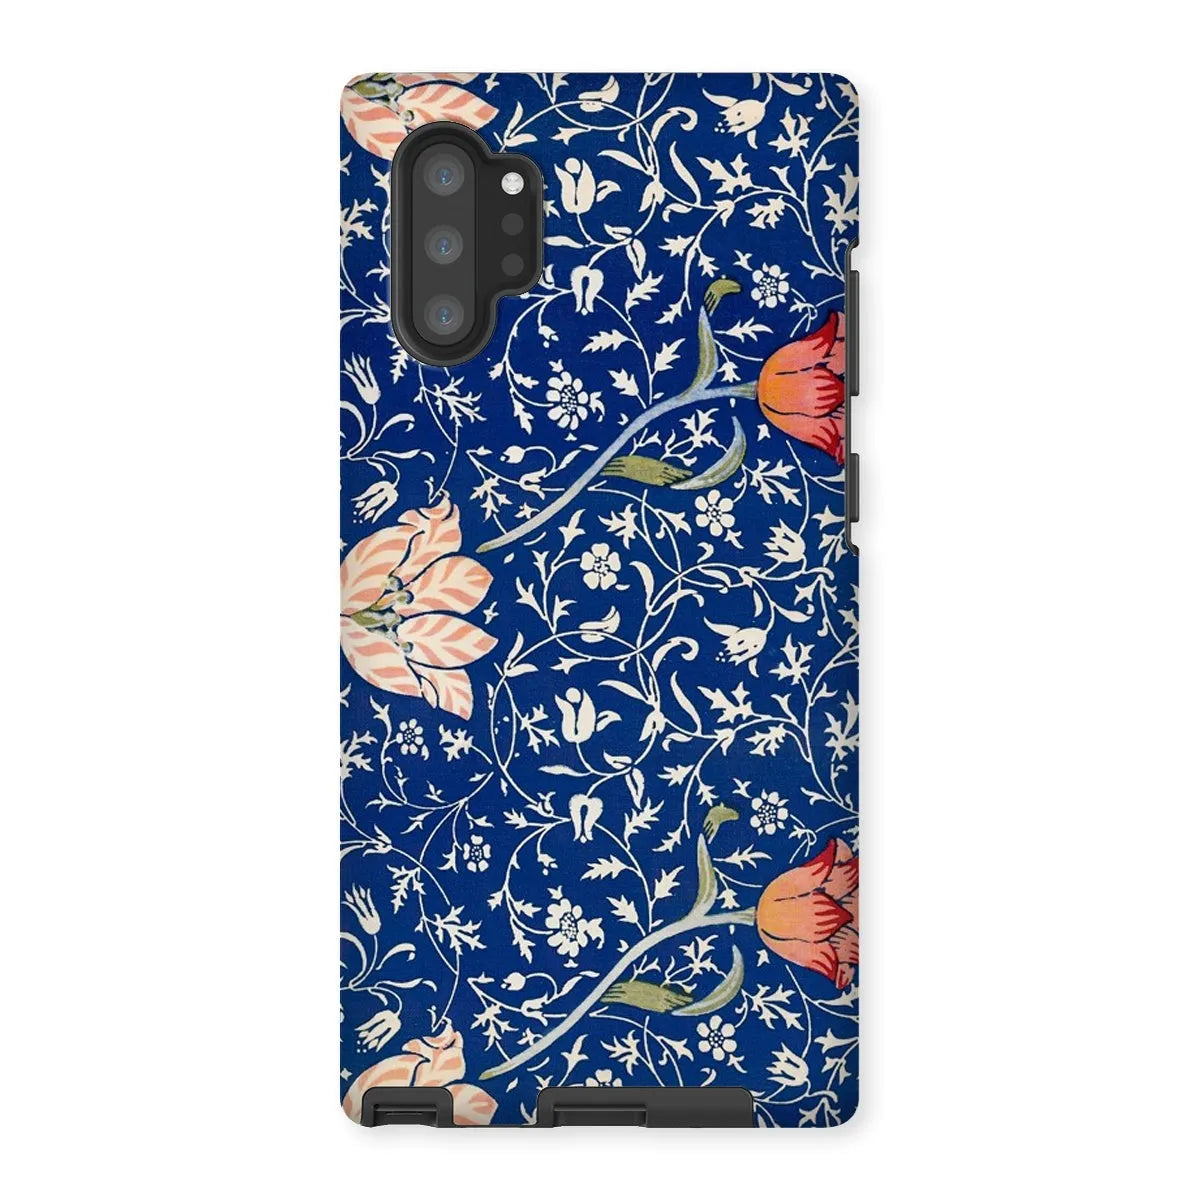 Medway - Floral Aesthetic Art Phone Case - William Morris - Samsung Galaxy Note 10p / Matte - Mobile Phone Cases